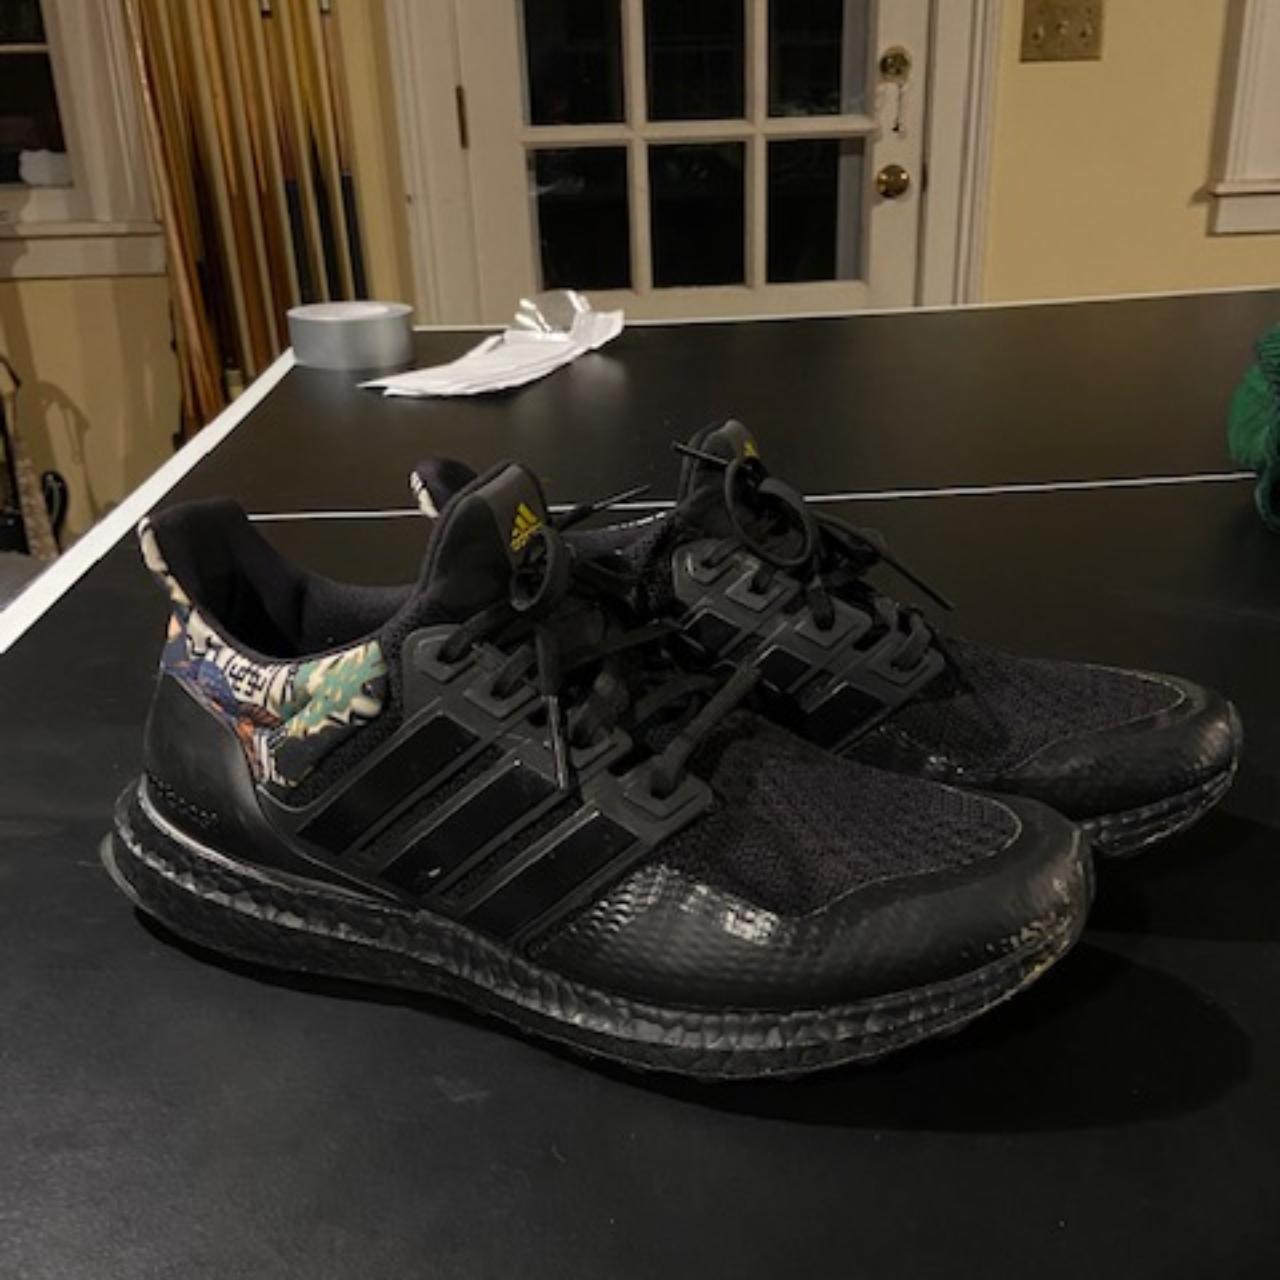 Adidas Ultra Boost 'Chinese New Year' Size 8.5 US... - Depop